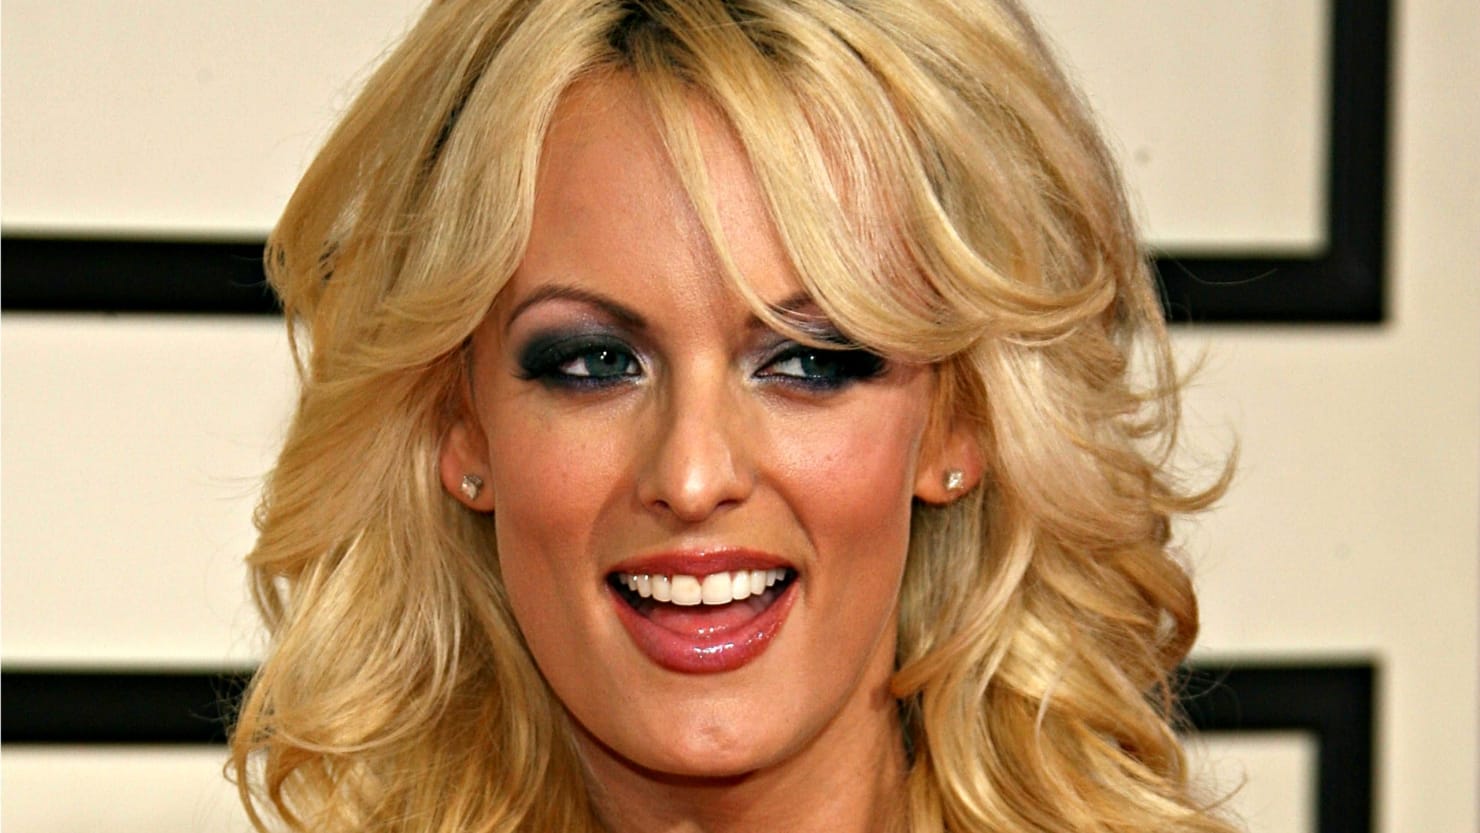 Dreams Of Spanking Porn - Report: Stormy Daniels Once Claimed She Spanked Trump With a Magazine